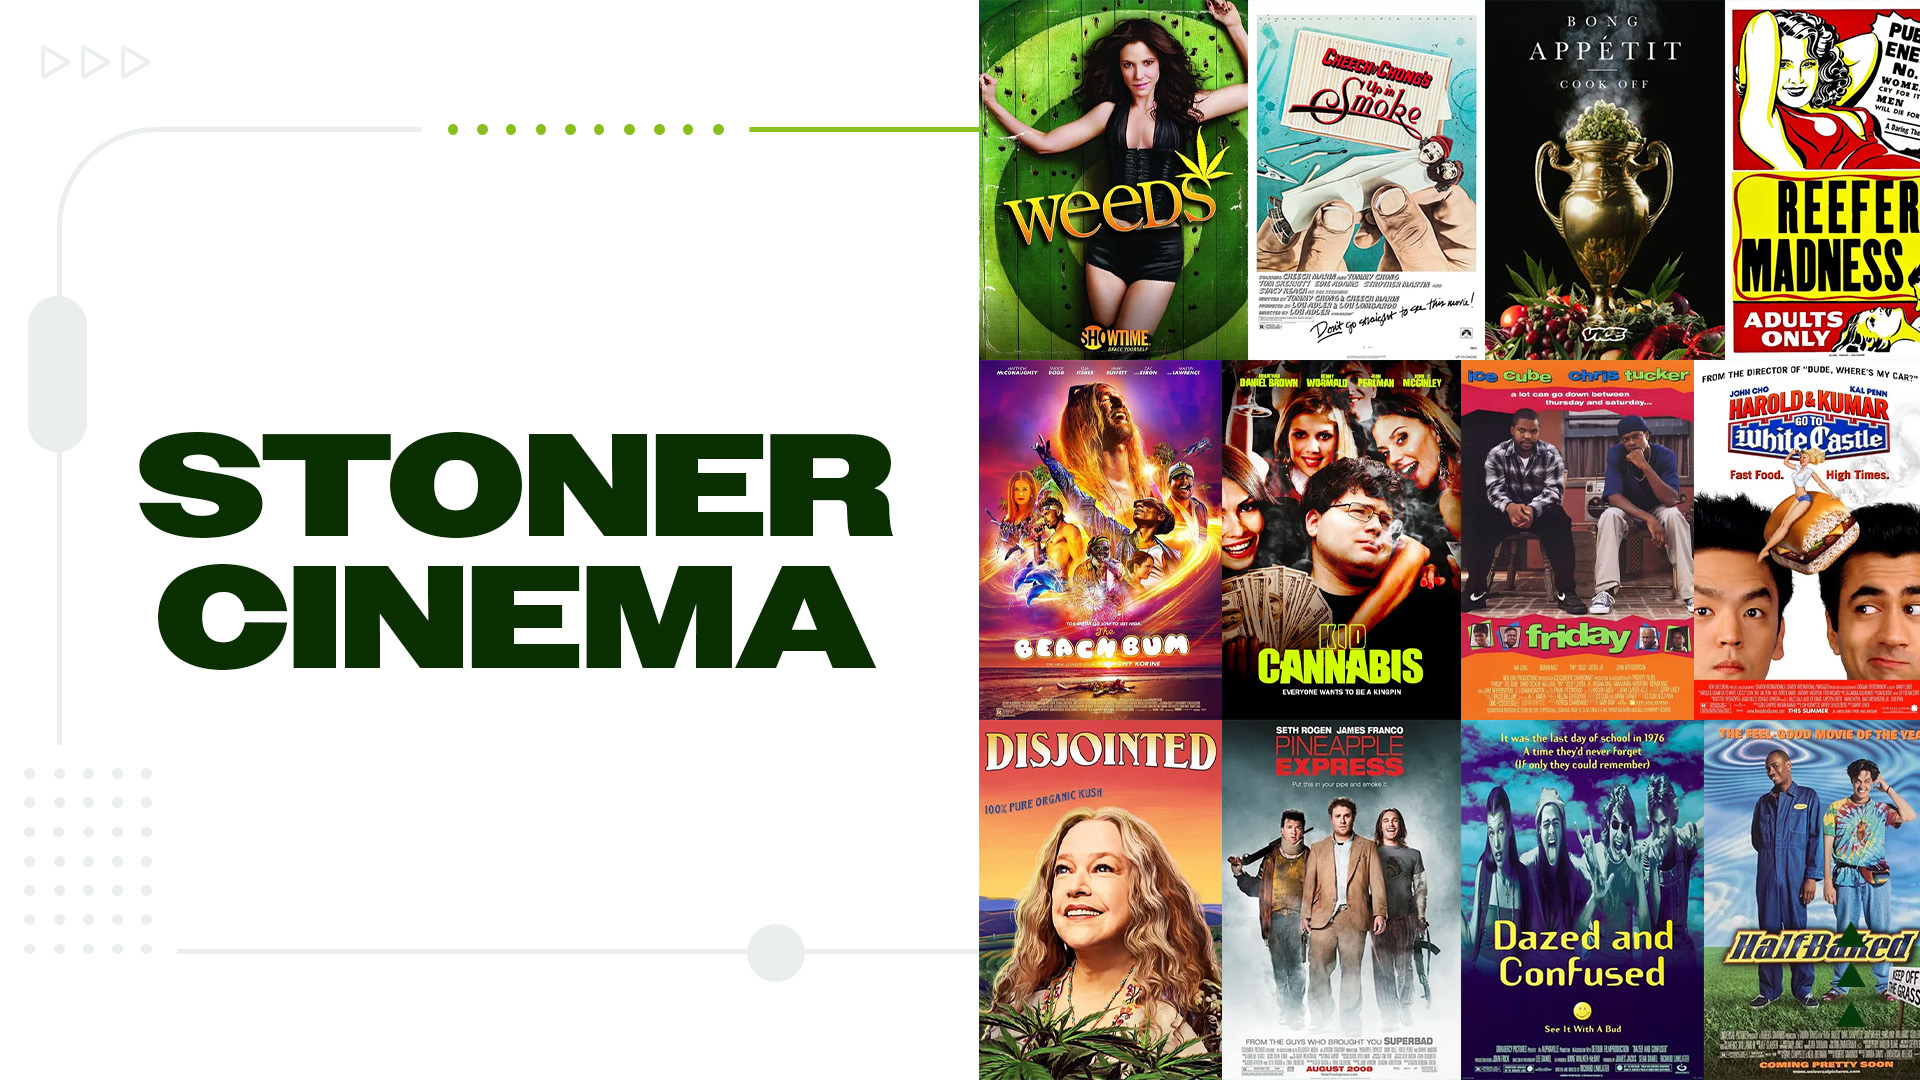 Introducing Stoner Cinema: A New Form of Public Consumption